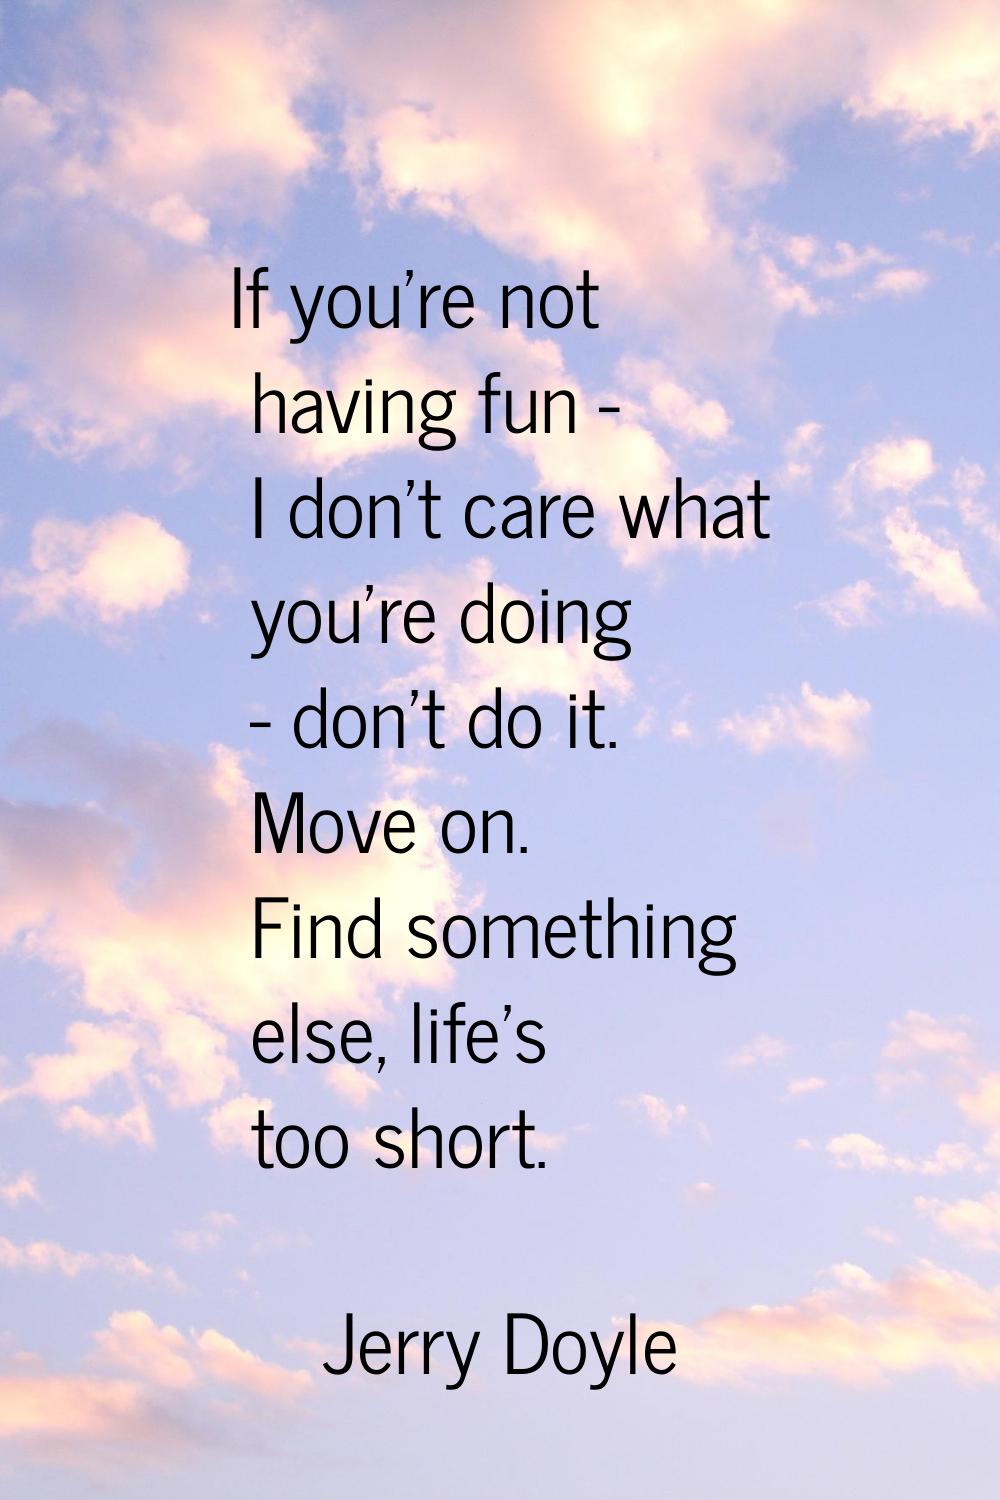 If you're not having fun - I don't care what you're doing - don't do it. Move on. Find something el